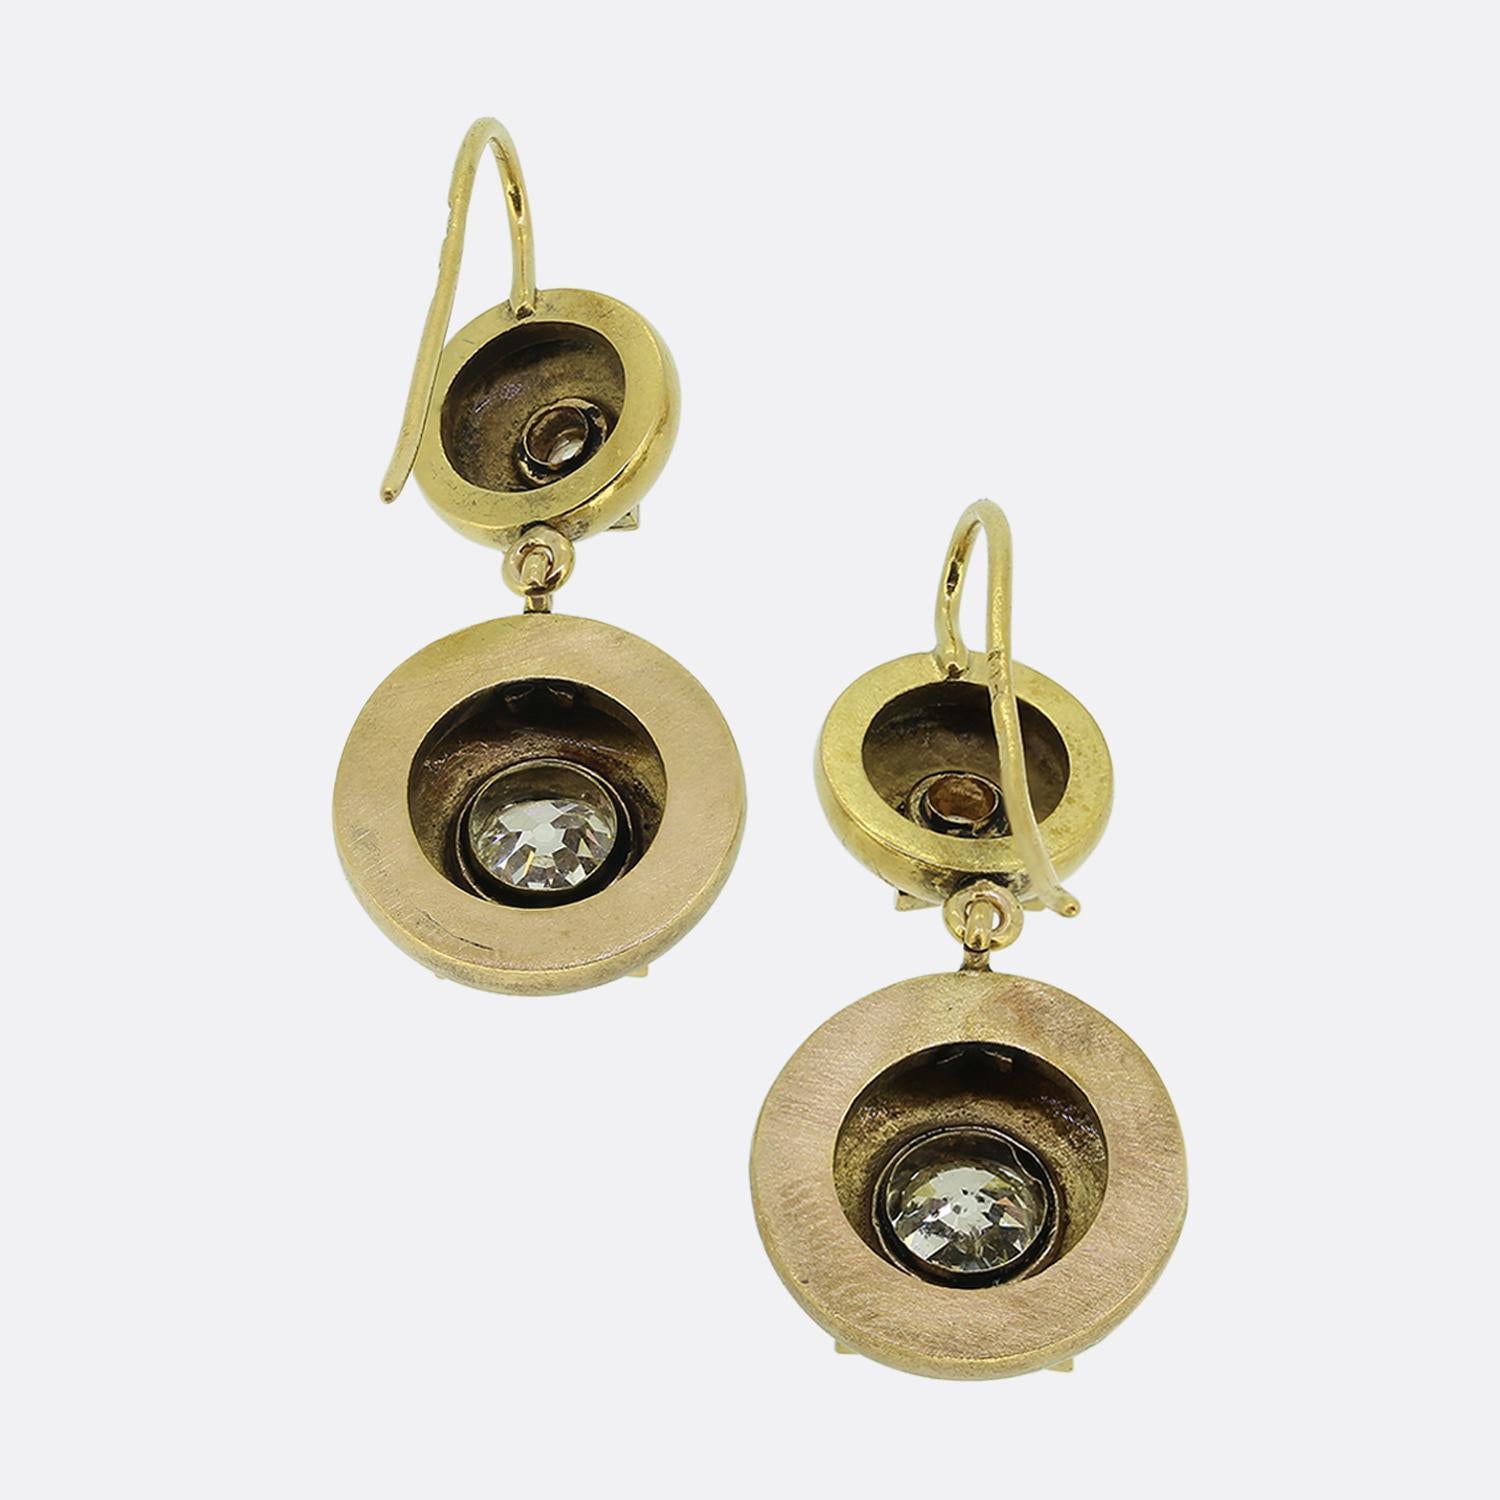 Here we have a splendid pair of diamond drop earrings dating back to the Victorian period. Crafted from 18ct yellow gold, each piece showcases a duo of circular domes; the smaller of which plays host to the larger below. Each motif has been set with